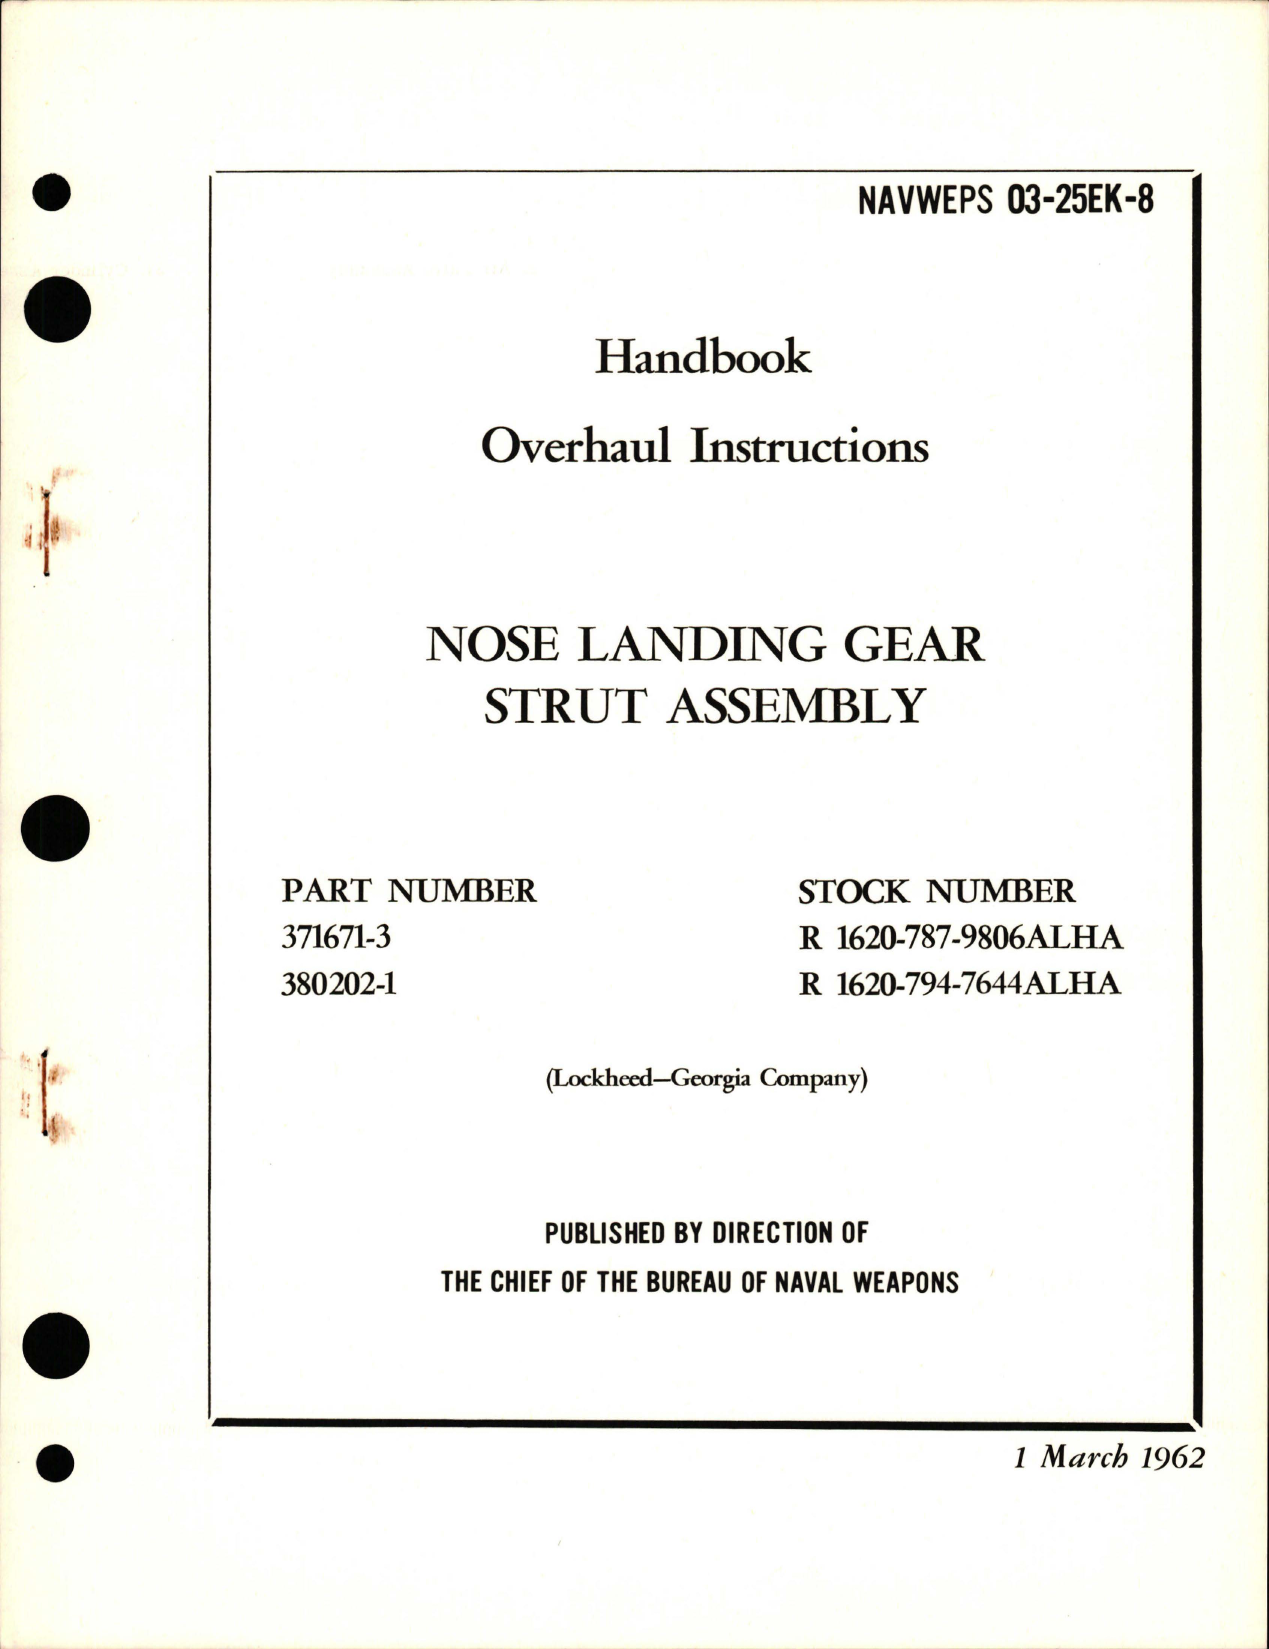 Sample page 1 from AirCorps Library document: Overhaul Instructions for Nose Landing Gear Strut Assembly - Parts 371671-3 and 380202-1